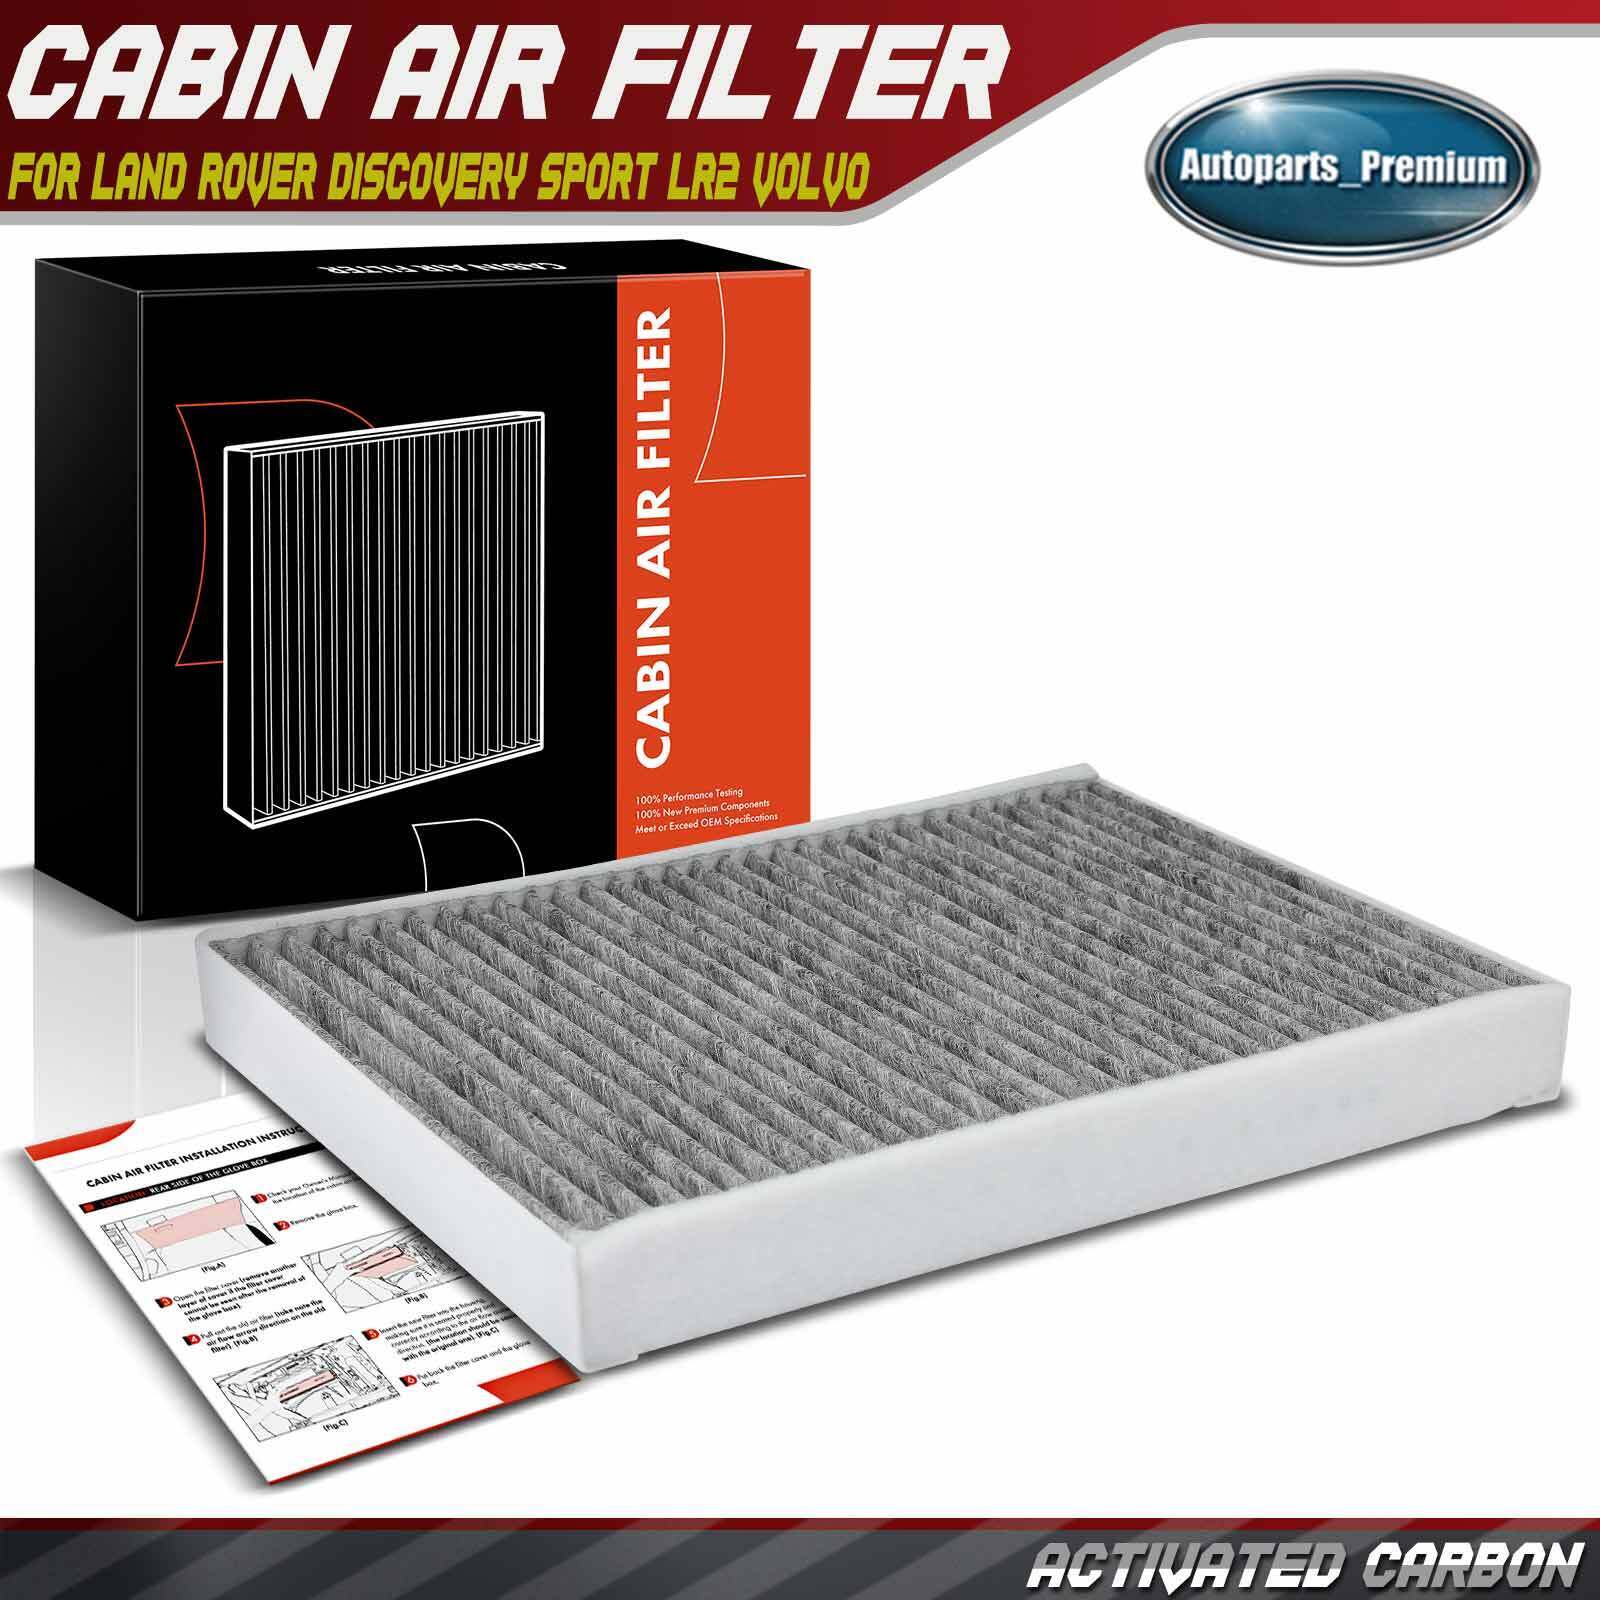 Activated Carbon Cabin Air Filter for Land Rover Discovery Sport LR2 Volvo S60